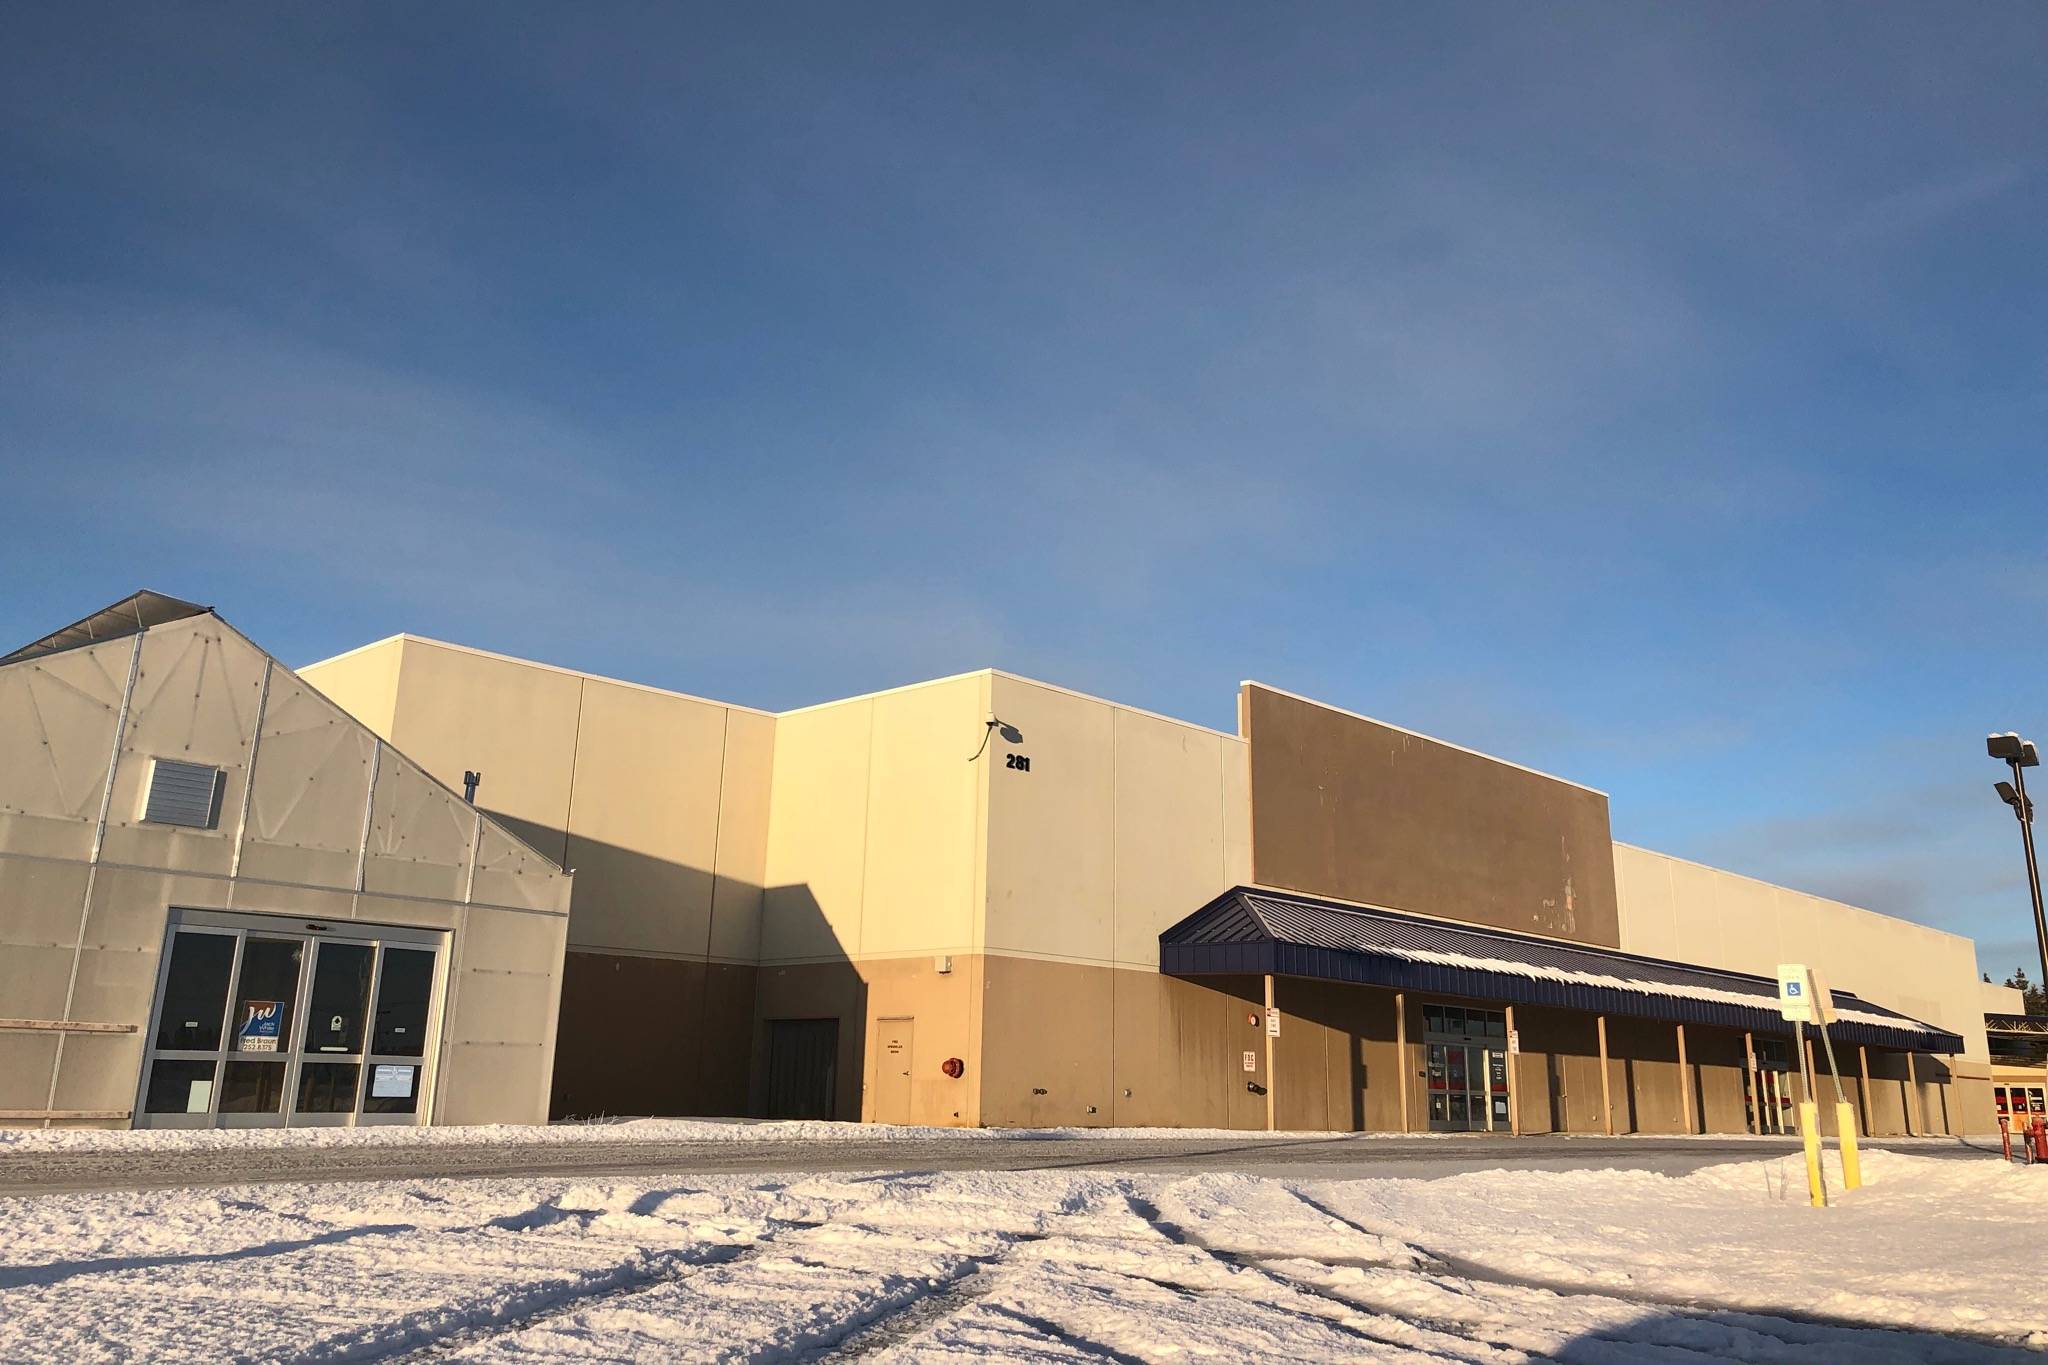 The former Lowe’s Home Improvement warehouse space on Marathon Road in Kenai stands empty Friday. (Photo by Victoria Petersen/Peninsula Clarion)